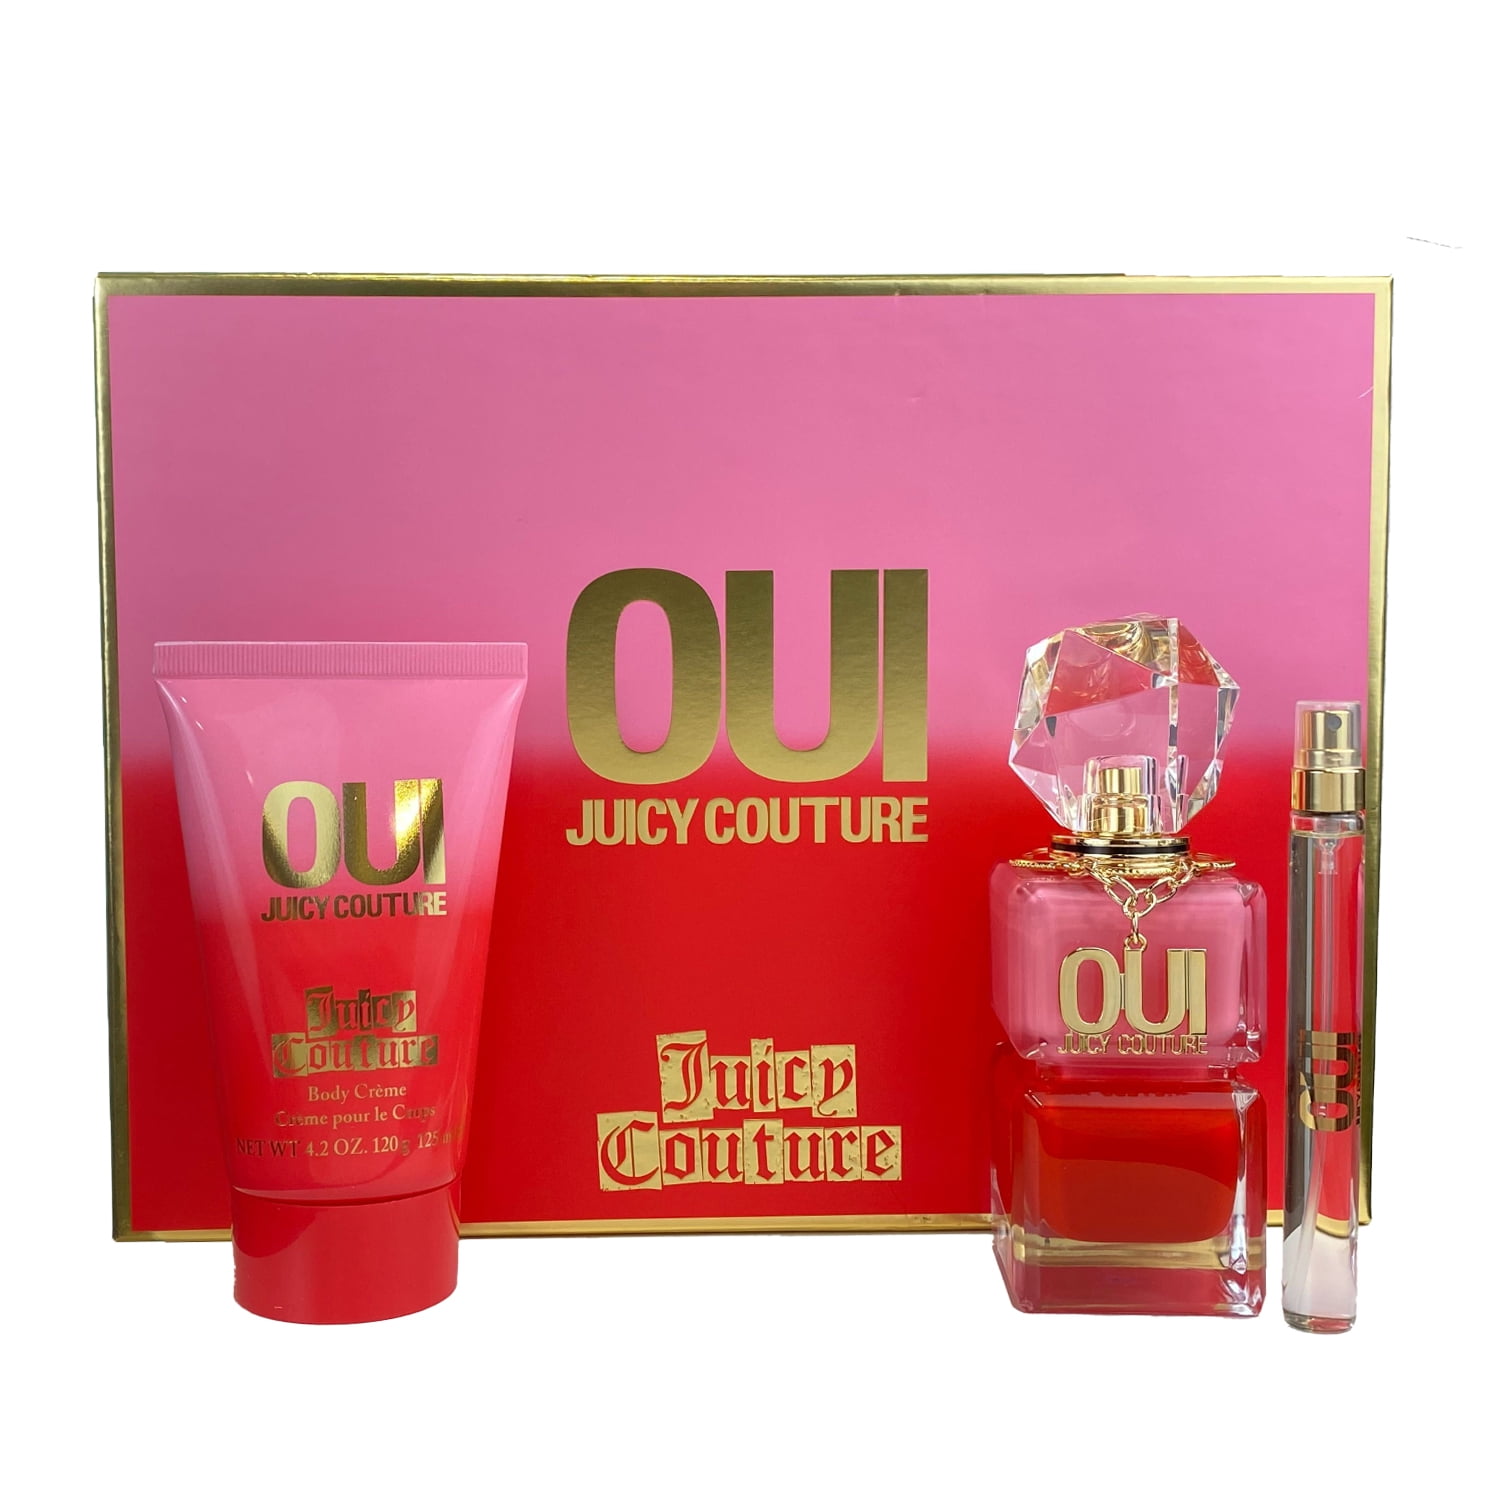 Oui Juicy Couture Juicy Couture Oui Juicy Couture 3 Pc. Gift Set For